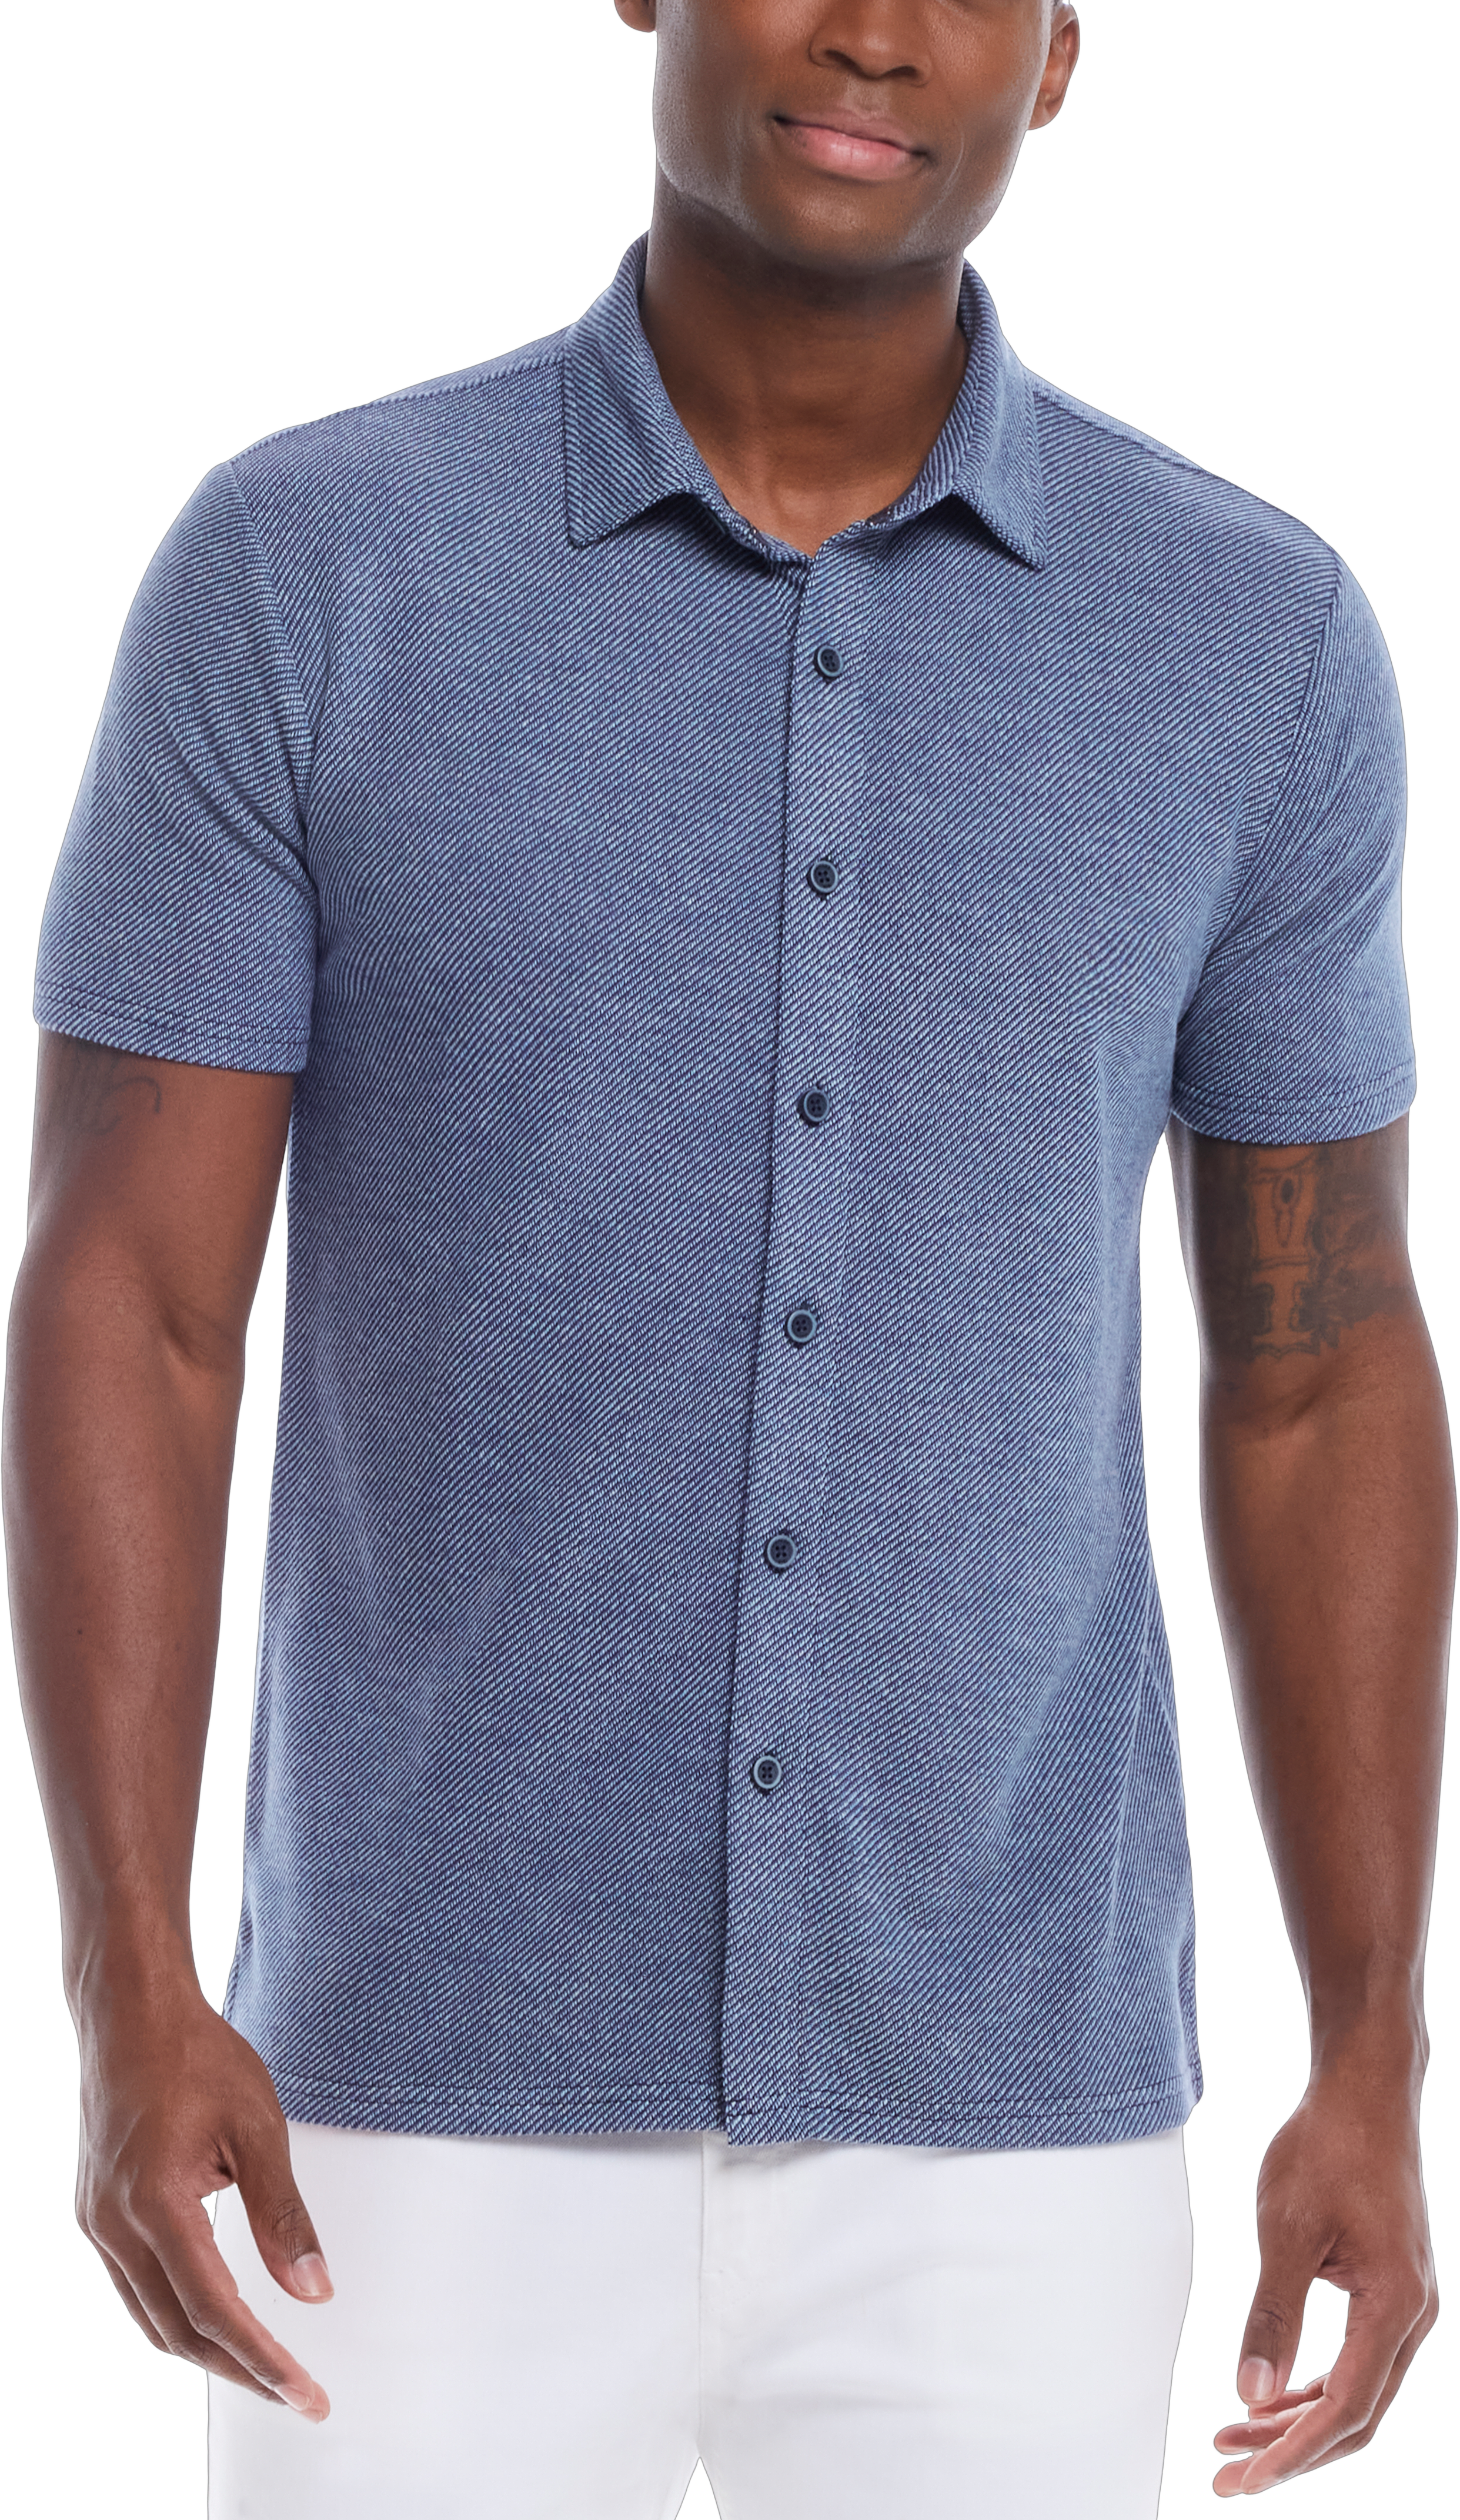 Classic Fit French Terry Knit Shirt